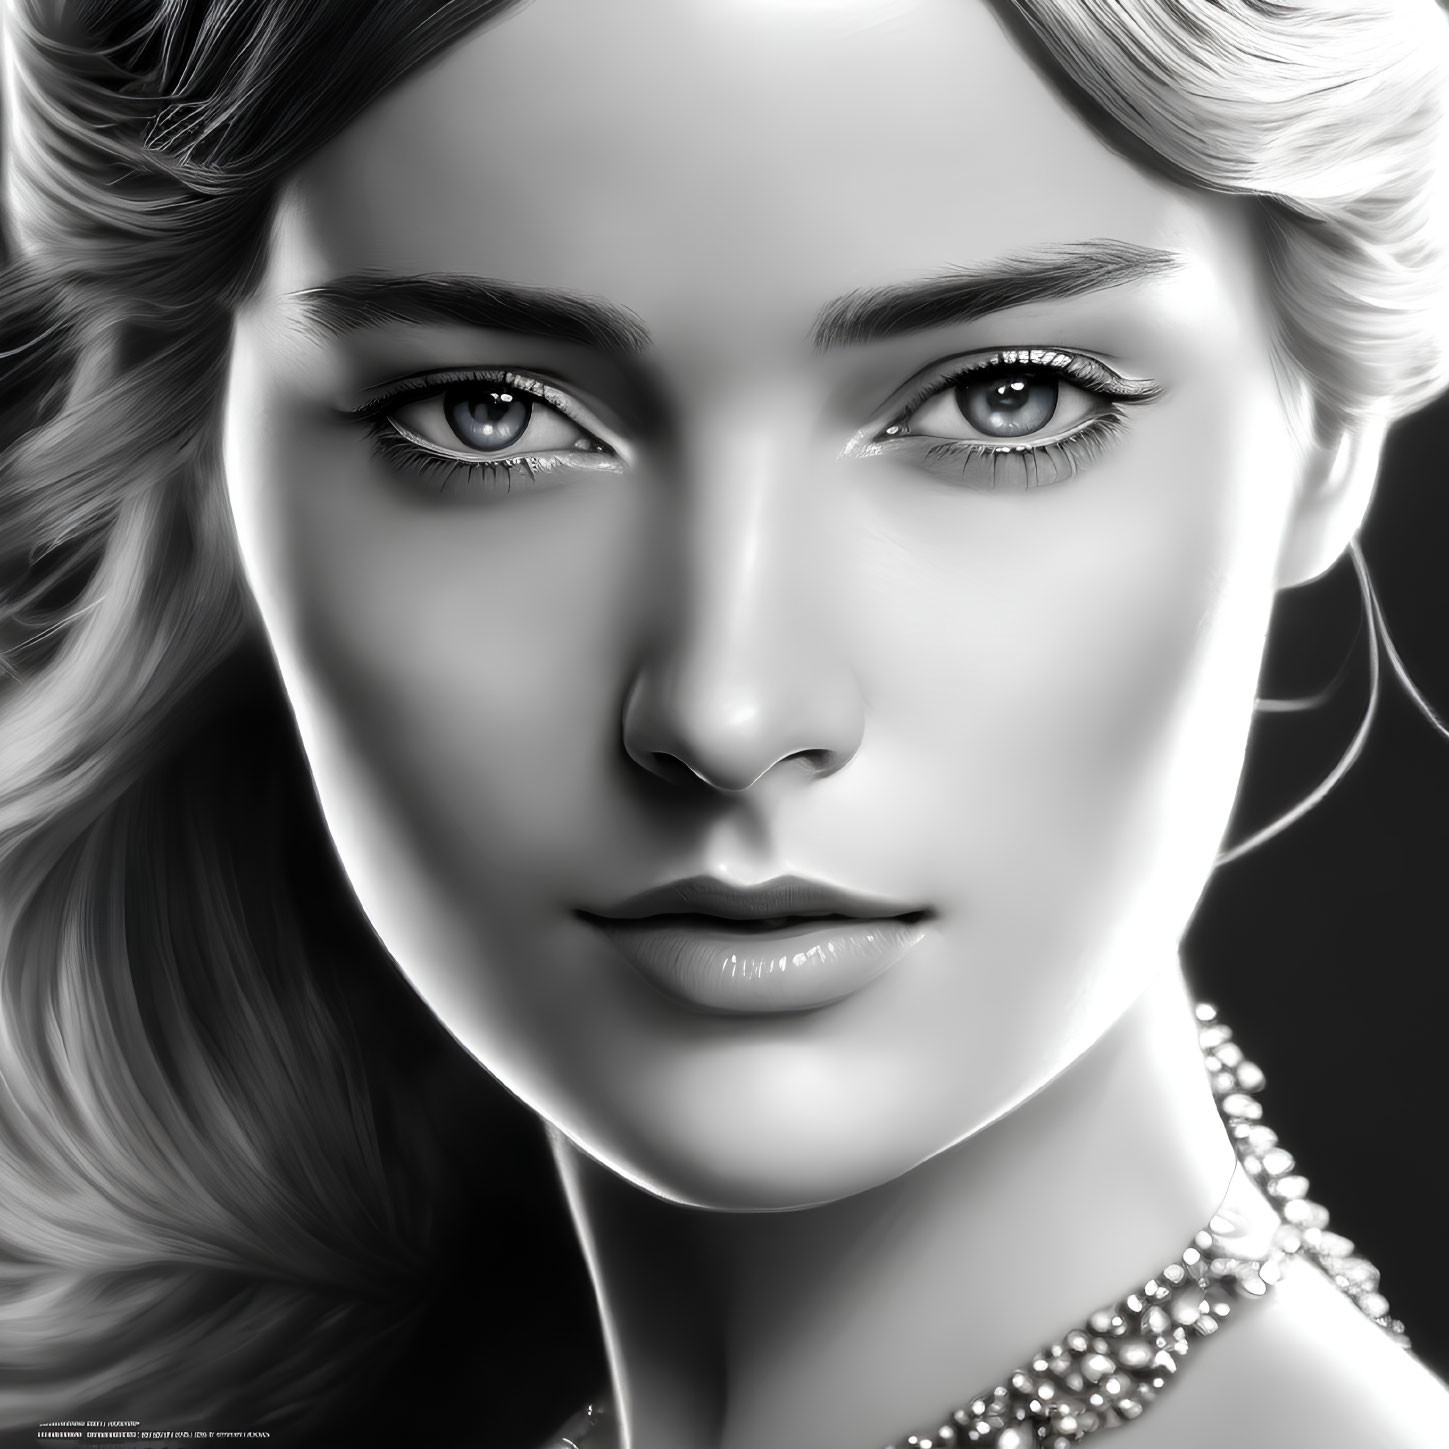 Monochrome portrait of woman with captivating eyes and elegant jewelry